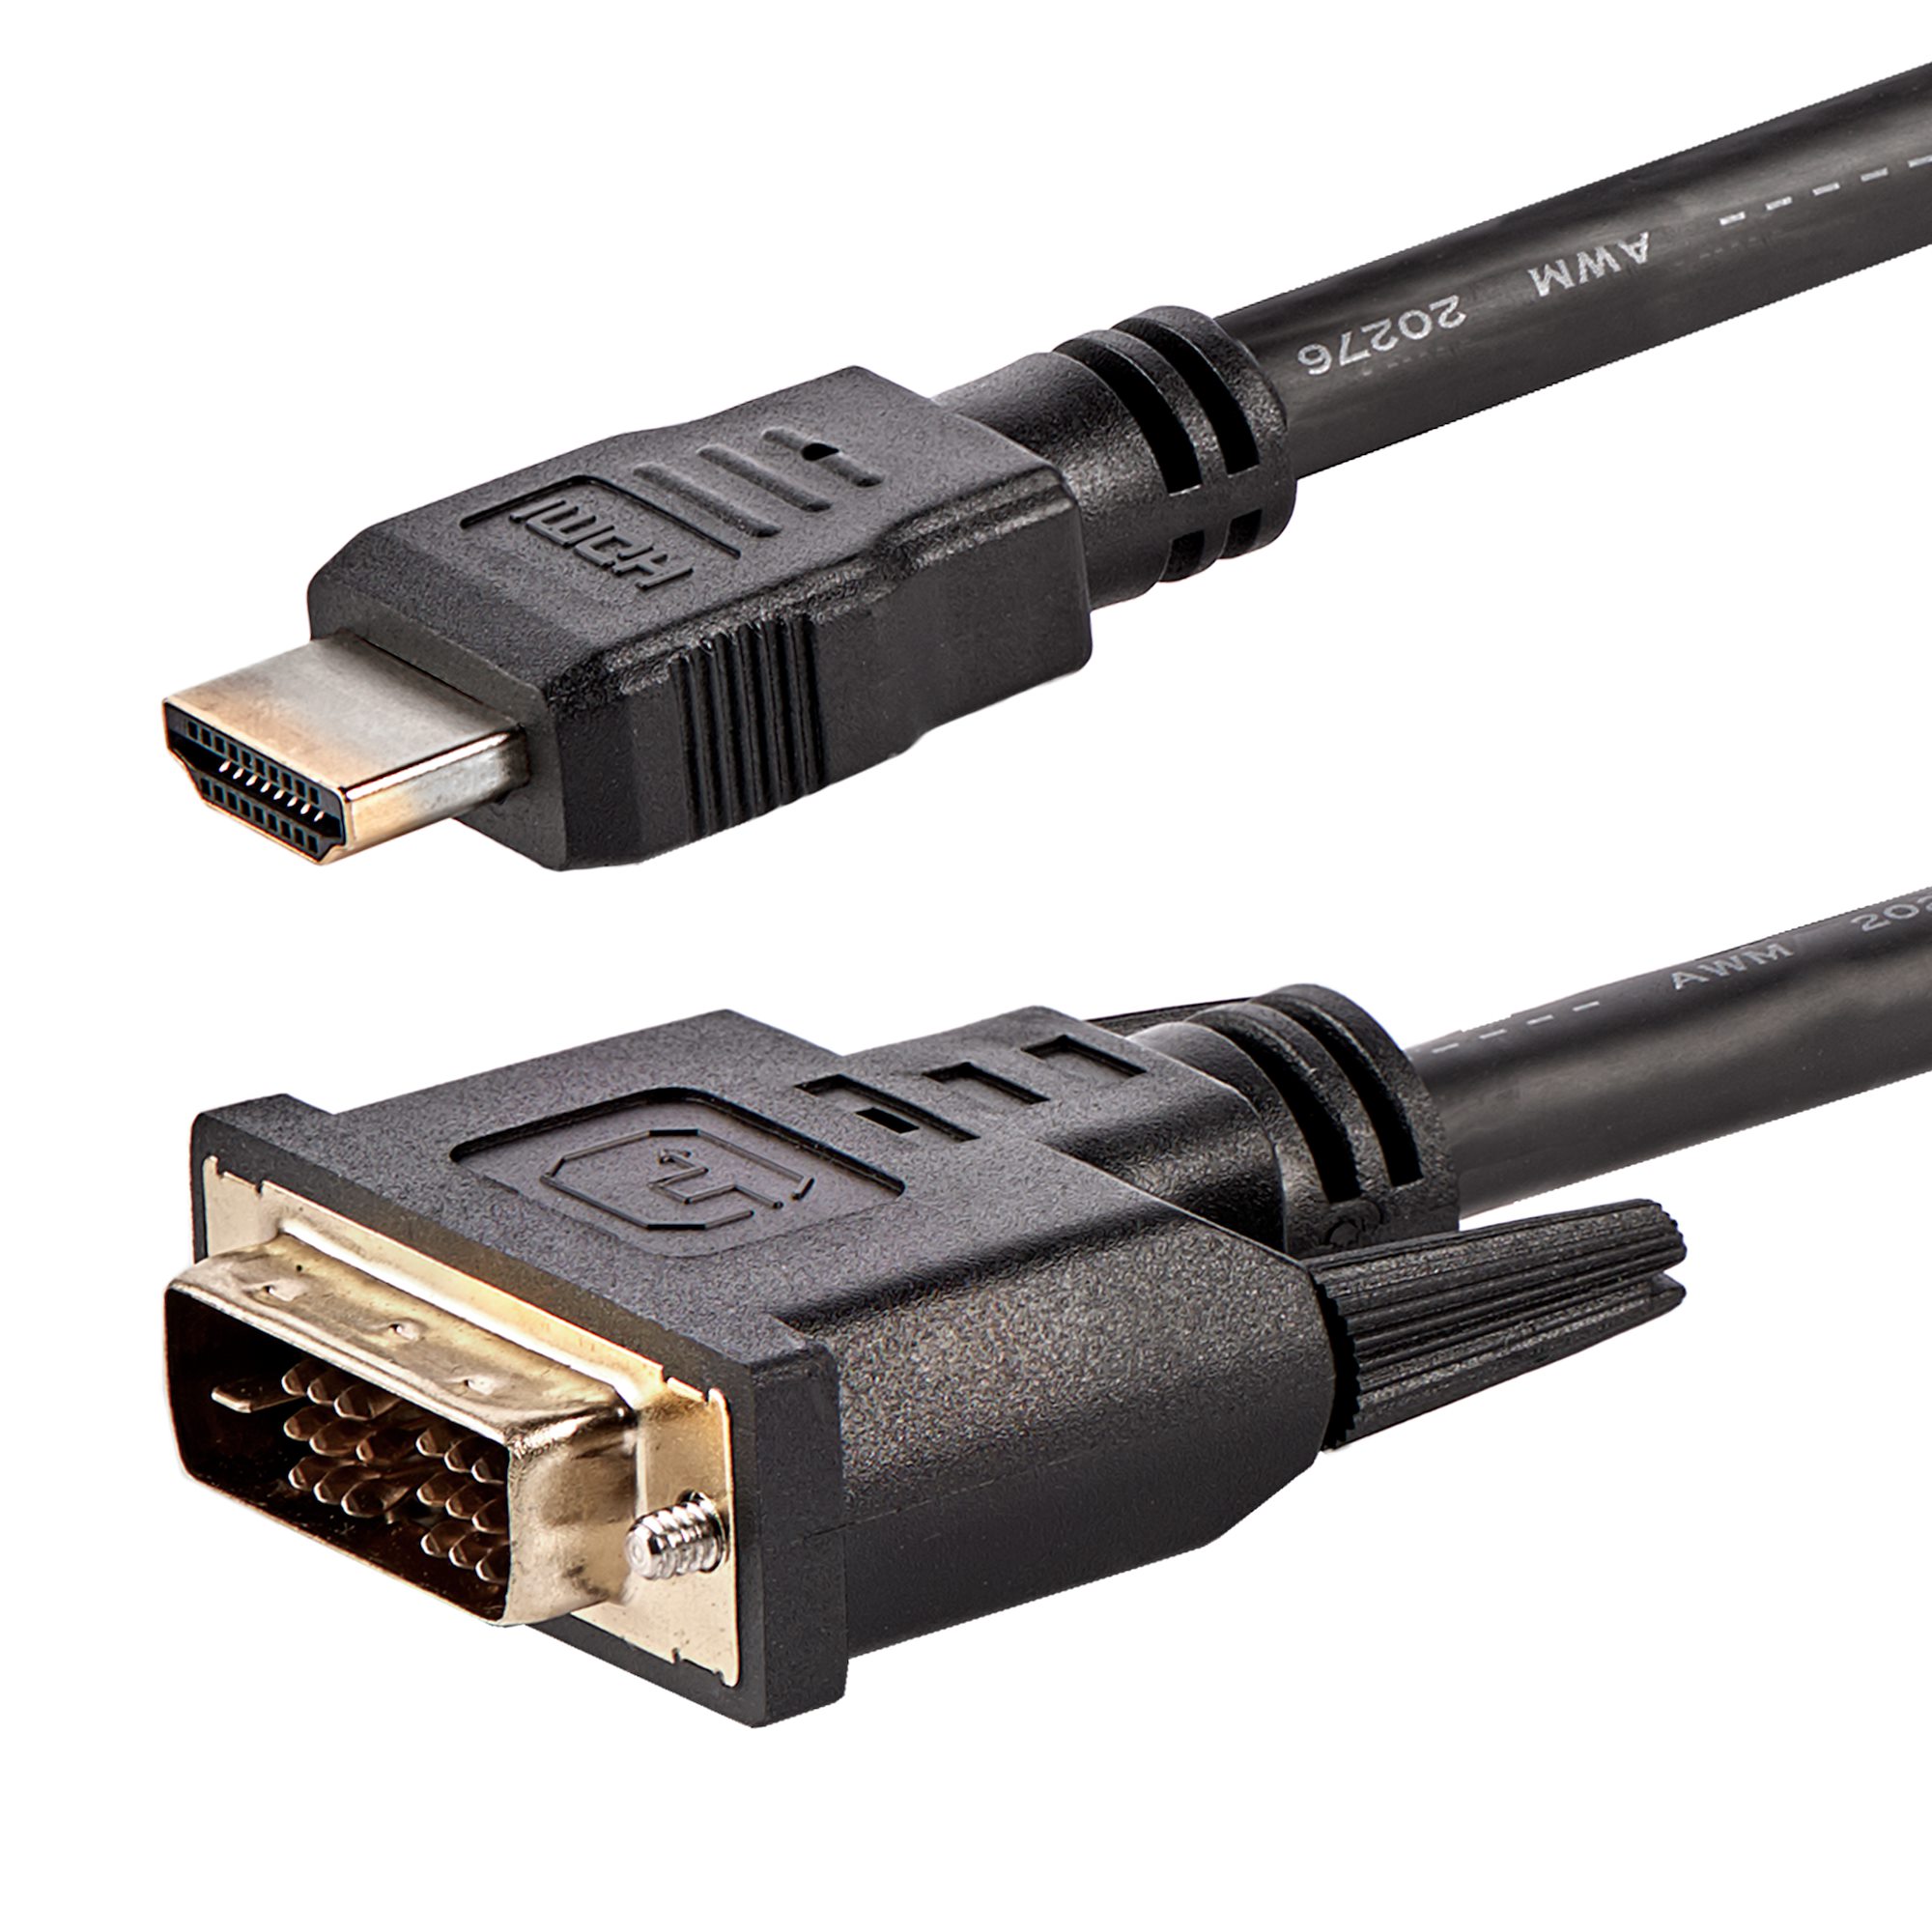 6ft/1.8m HDMI to DVI Cable, - Cables & HDMI Adapters | StarTech.com